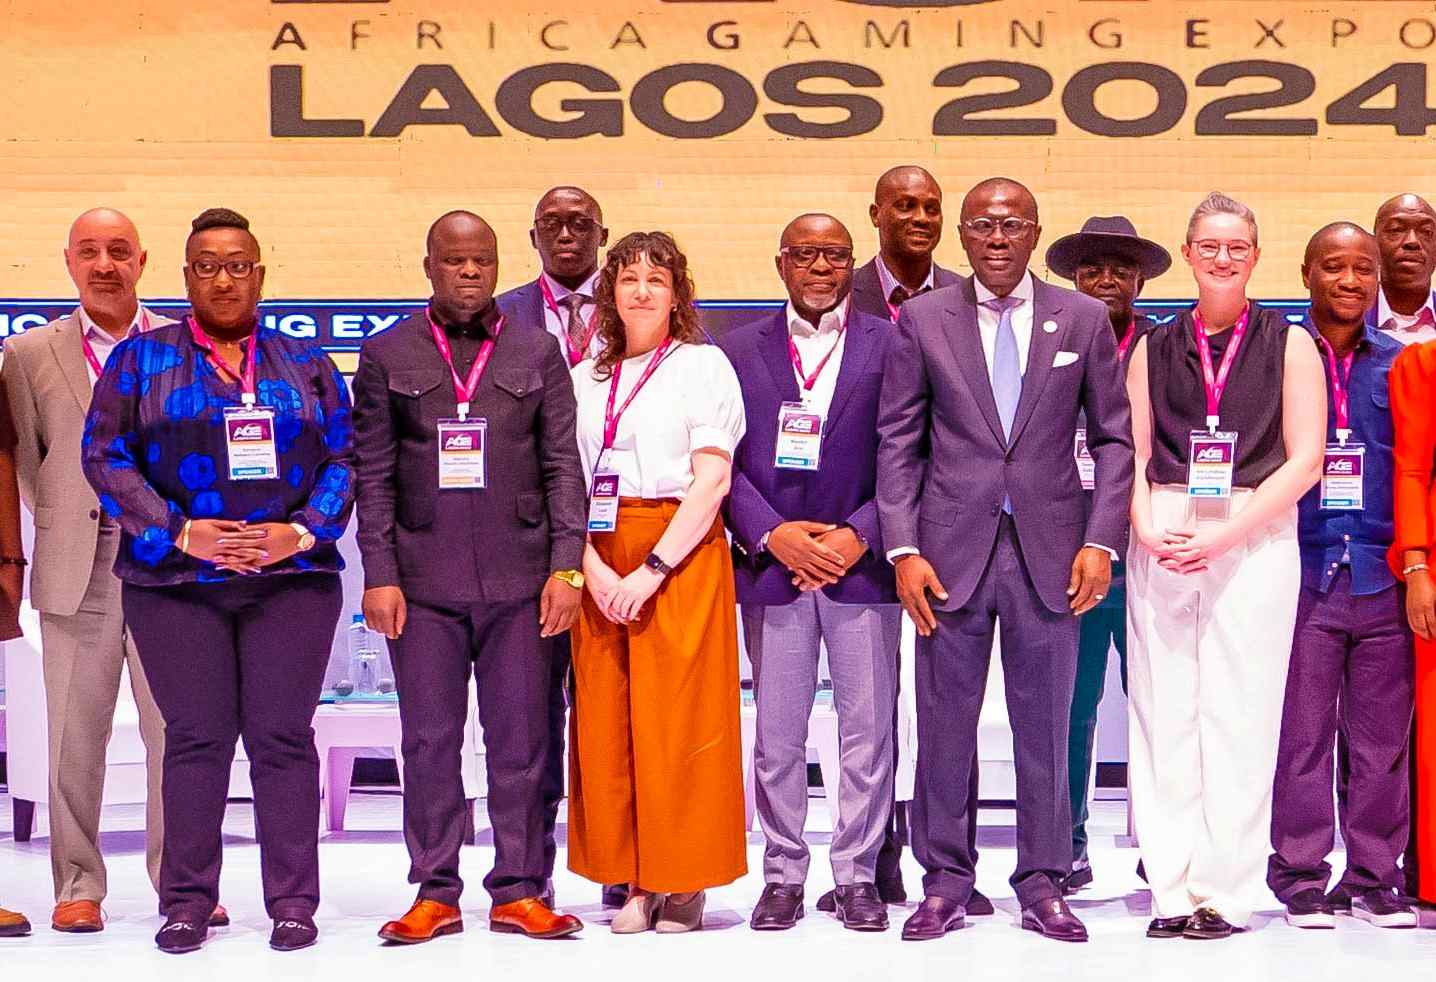 LAGOS'LL LEVERAGE POTENTIALS OF GAMING, ENTERTAINMENT, TOURISM SECTORS, SAYS SANWO-OLU